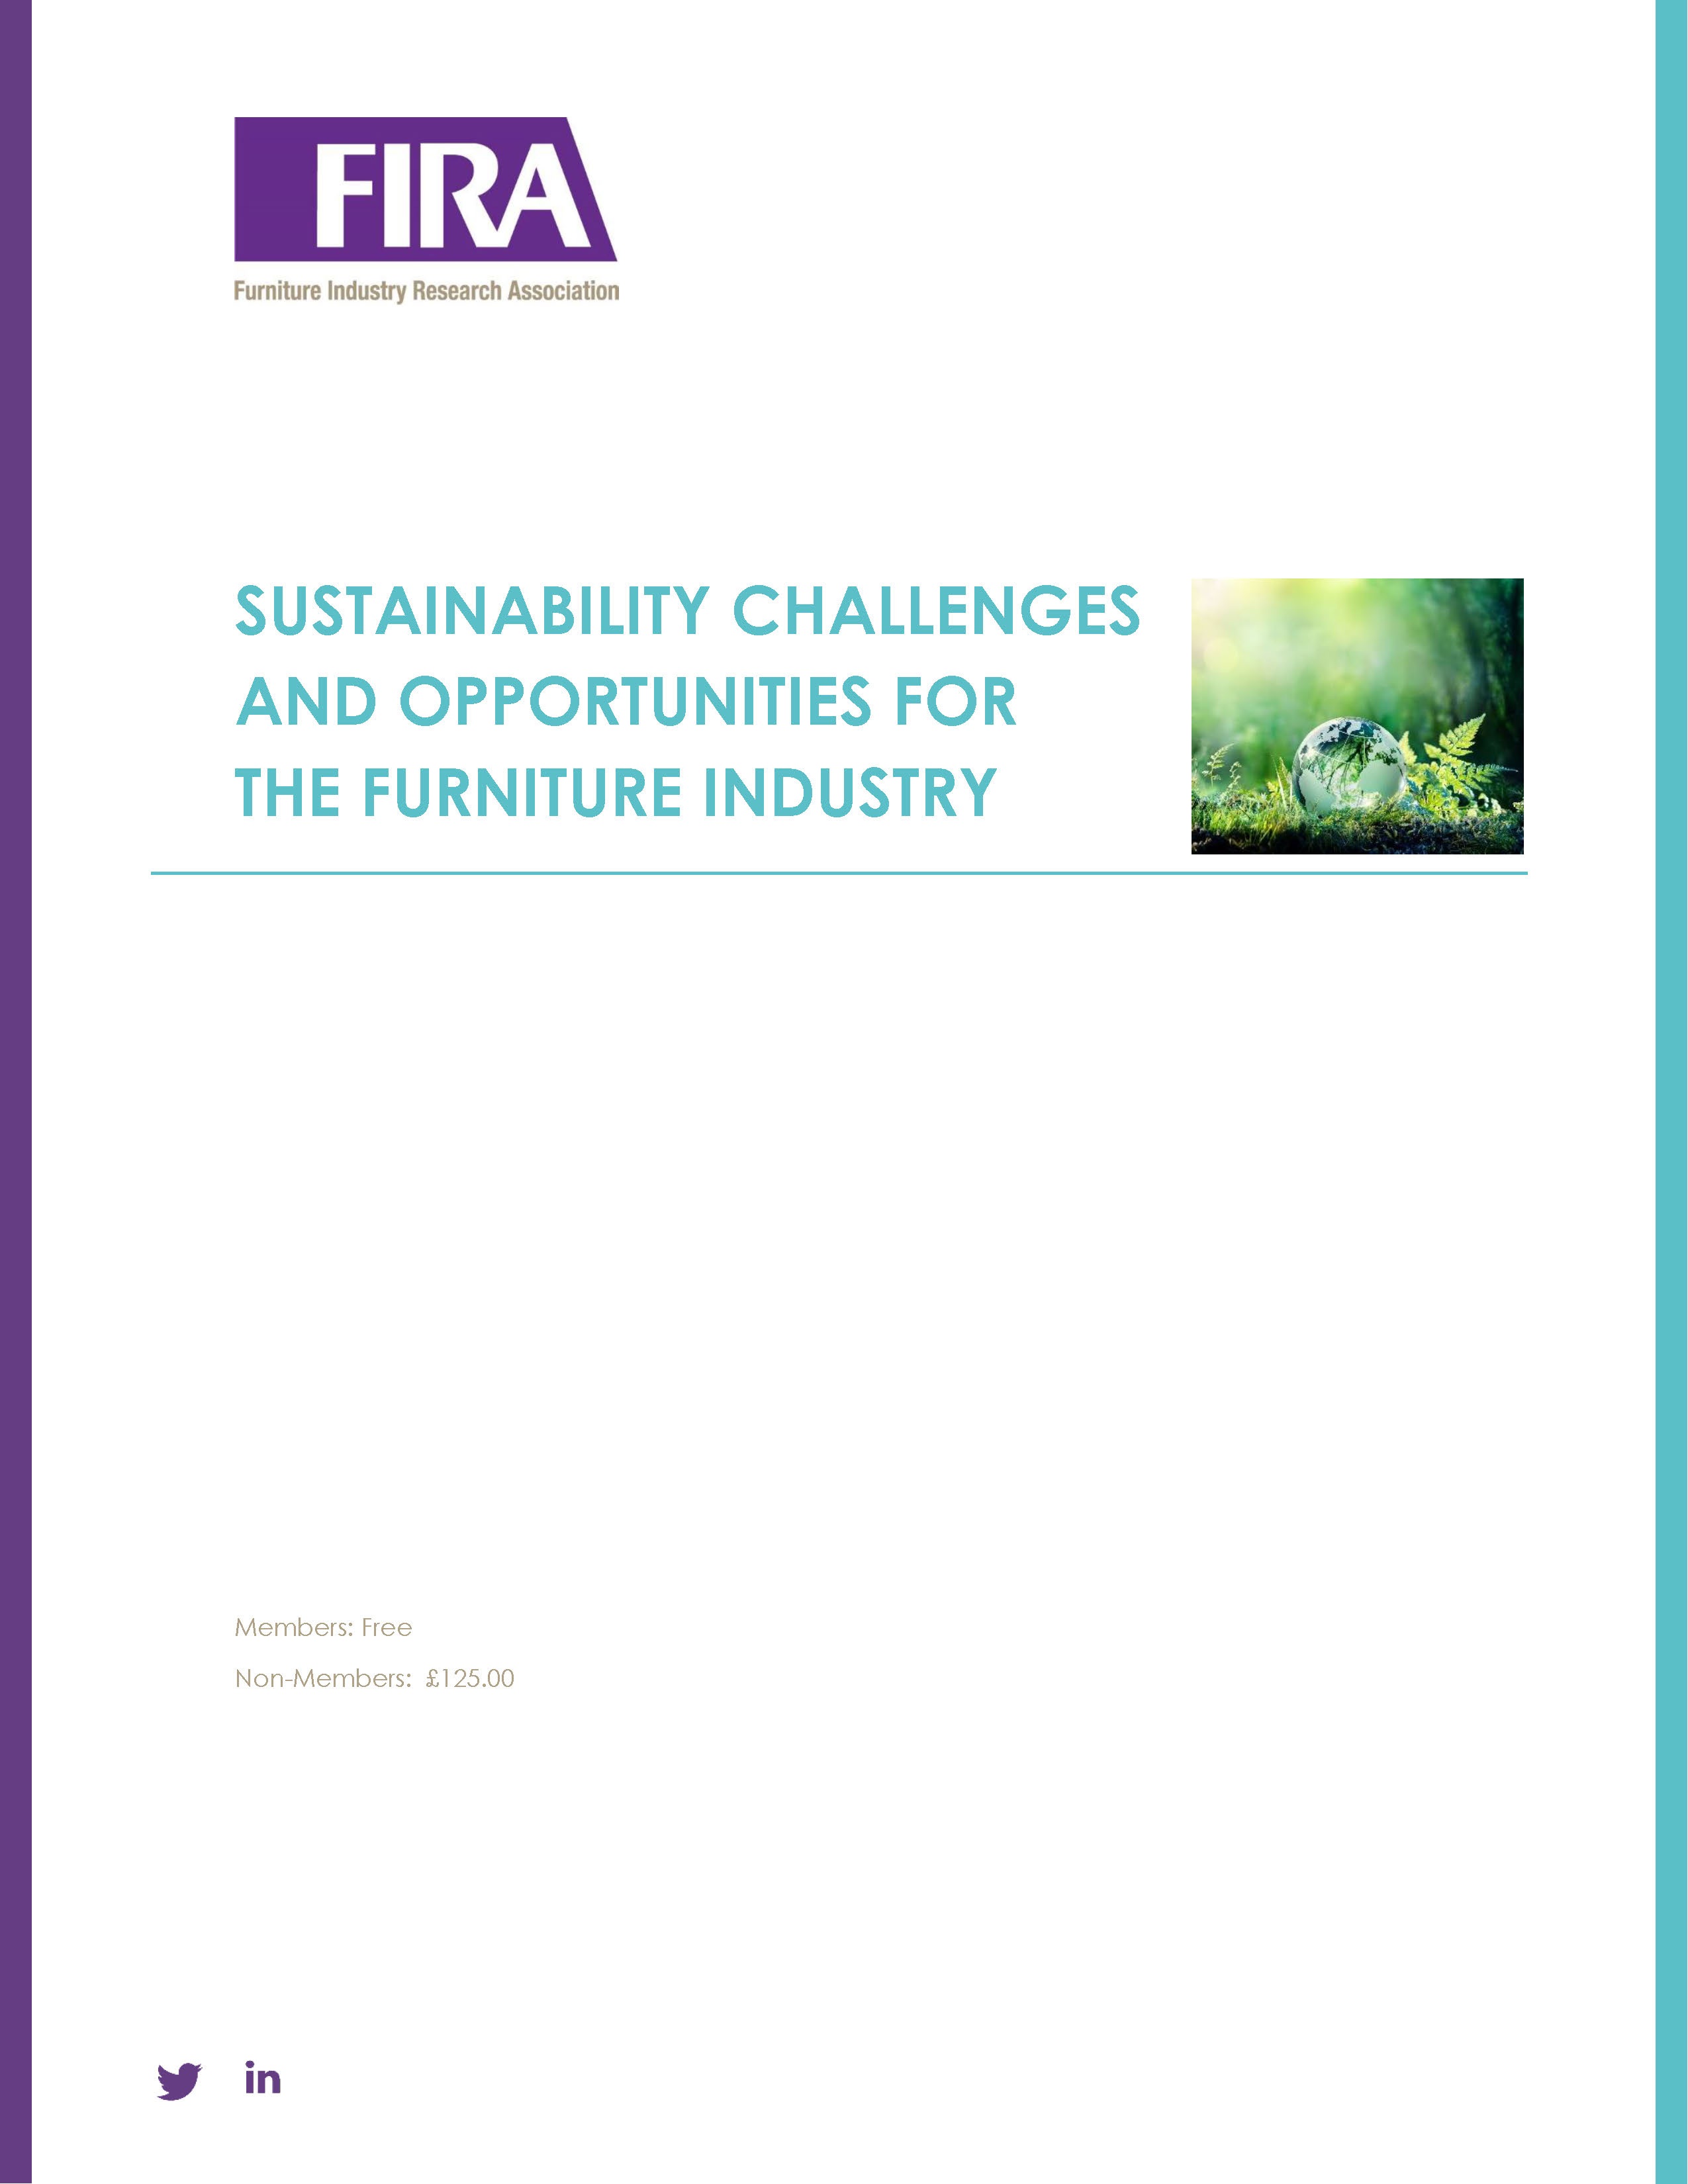 Sustainability Challenges and Opportunities in the Furniture Industry